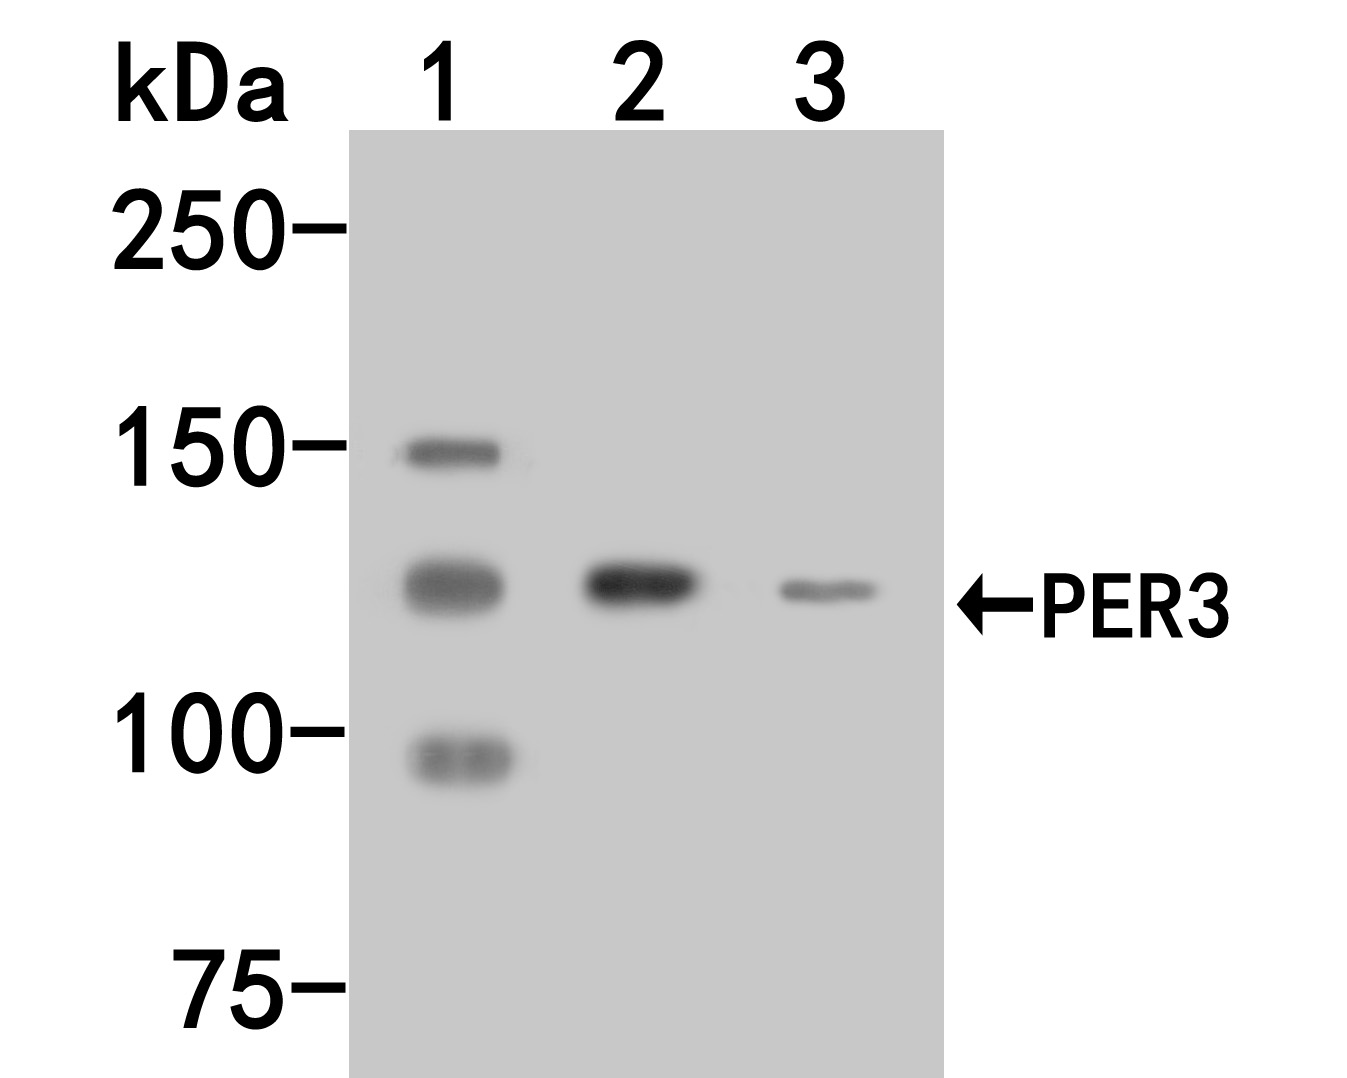 Western blot analysis of PER3 on different lysates. Proteins were transferred to a PVDF membrane and blocked with 5% BSA in PBS for 1 hour at room temperature. The primary antibody (HA500072, 1/500) was used in 5% BSA at room temperature for 2 hours. Goat Anti-Rabbit IgG - HRP Secondary Antibody (HA1001) at 1:5,000 dilution was used for 1 hour at room temperature.<br />
Positive control: <br />
Lane 1: Mouse pancreas tissue lysate<br />
Lane 2: Jurkat cell lysate<br />
Lane 3: Rat brain tissue lysate